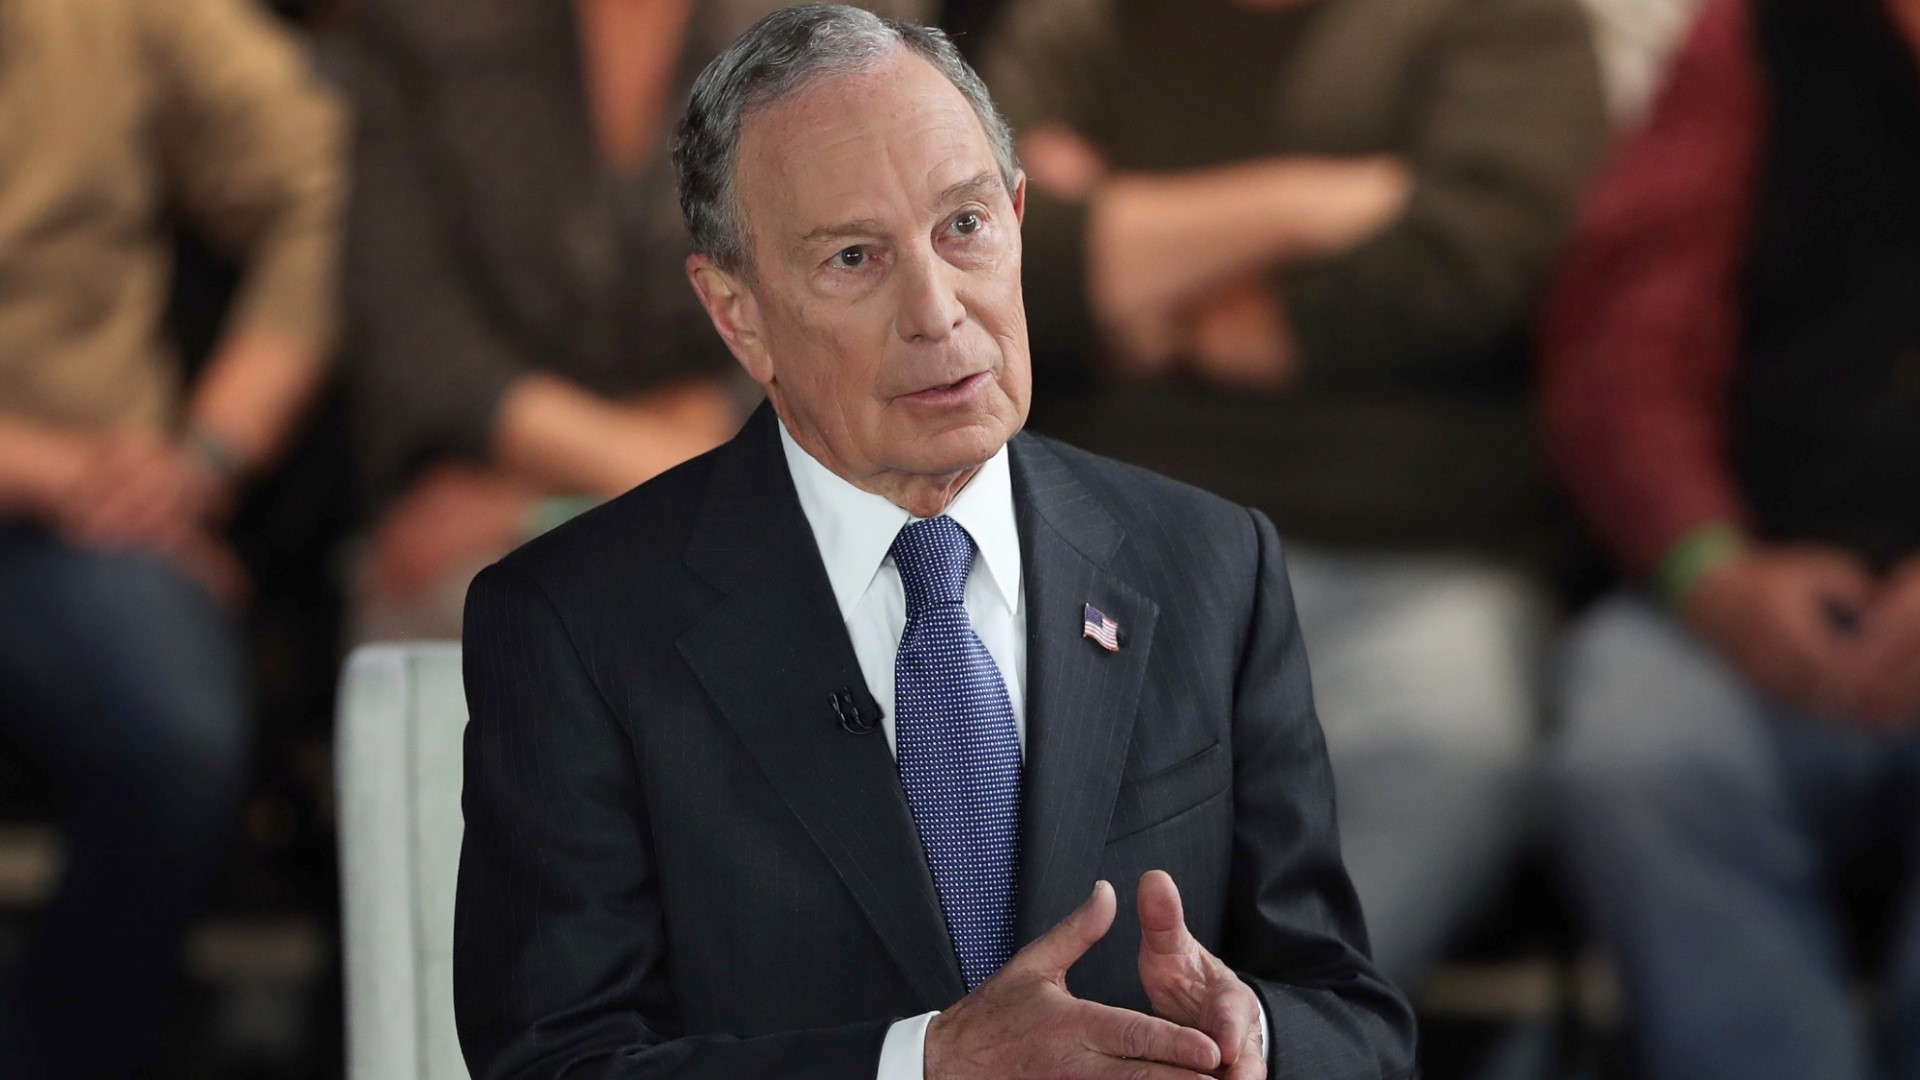 ]Presidential candidate Mike Bloomberg is the 12 richest person in the world, and is spending his own wealth on his campaign. We take a look at just how wealthy he really is. Veuer's Taisha Henry has the story.